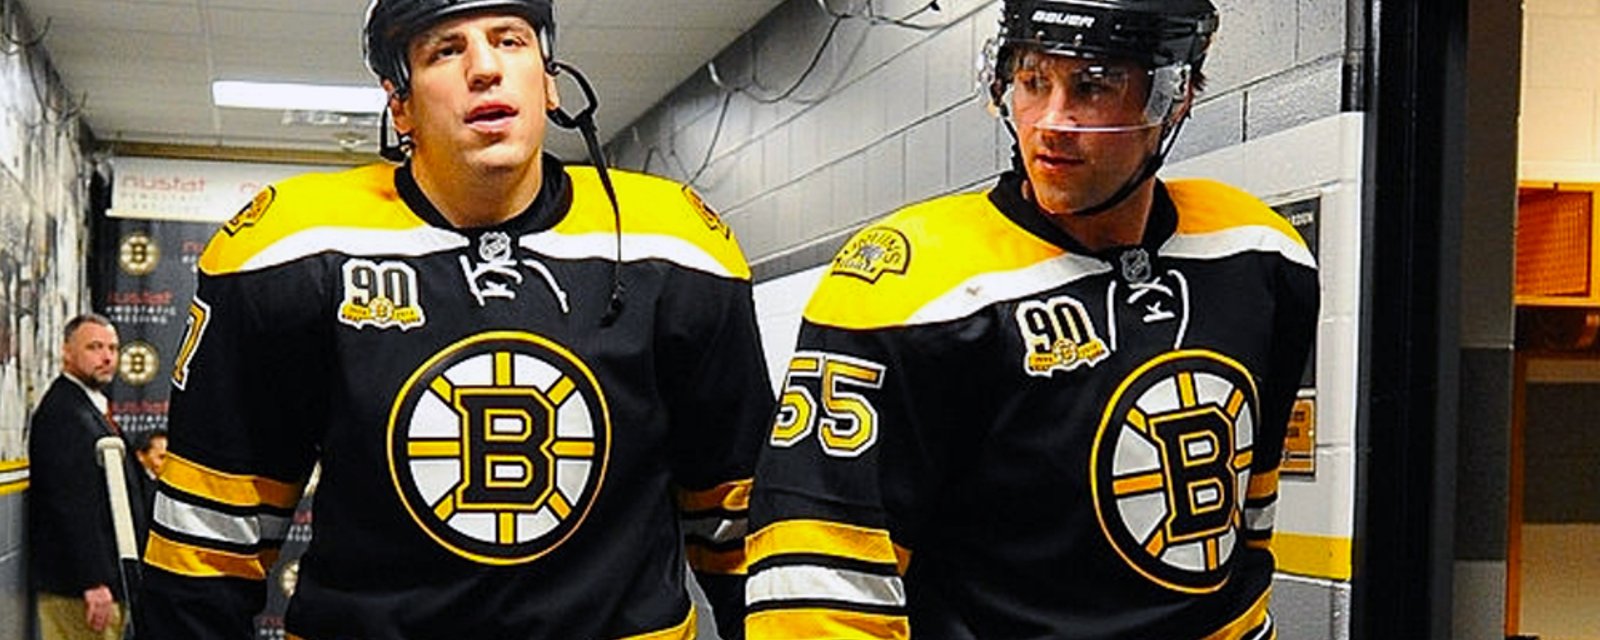 Lucic provides a health update on his good friend Johnny Boychuk